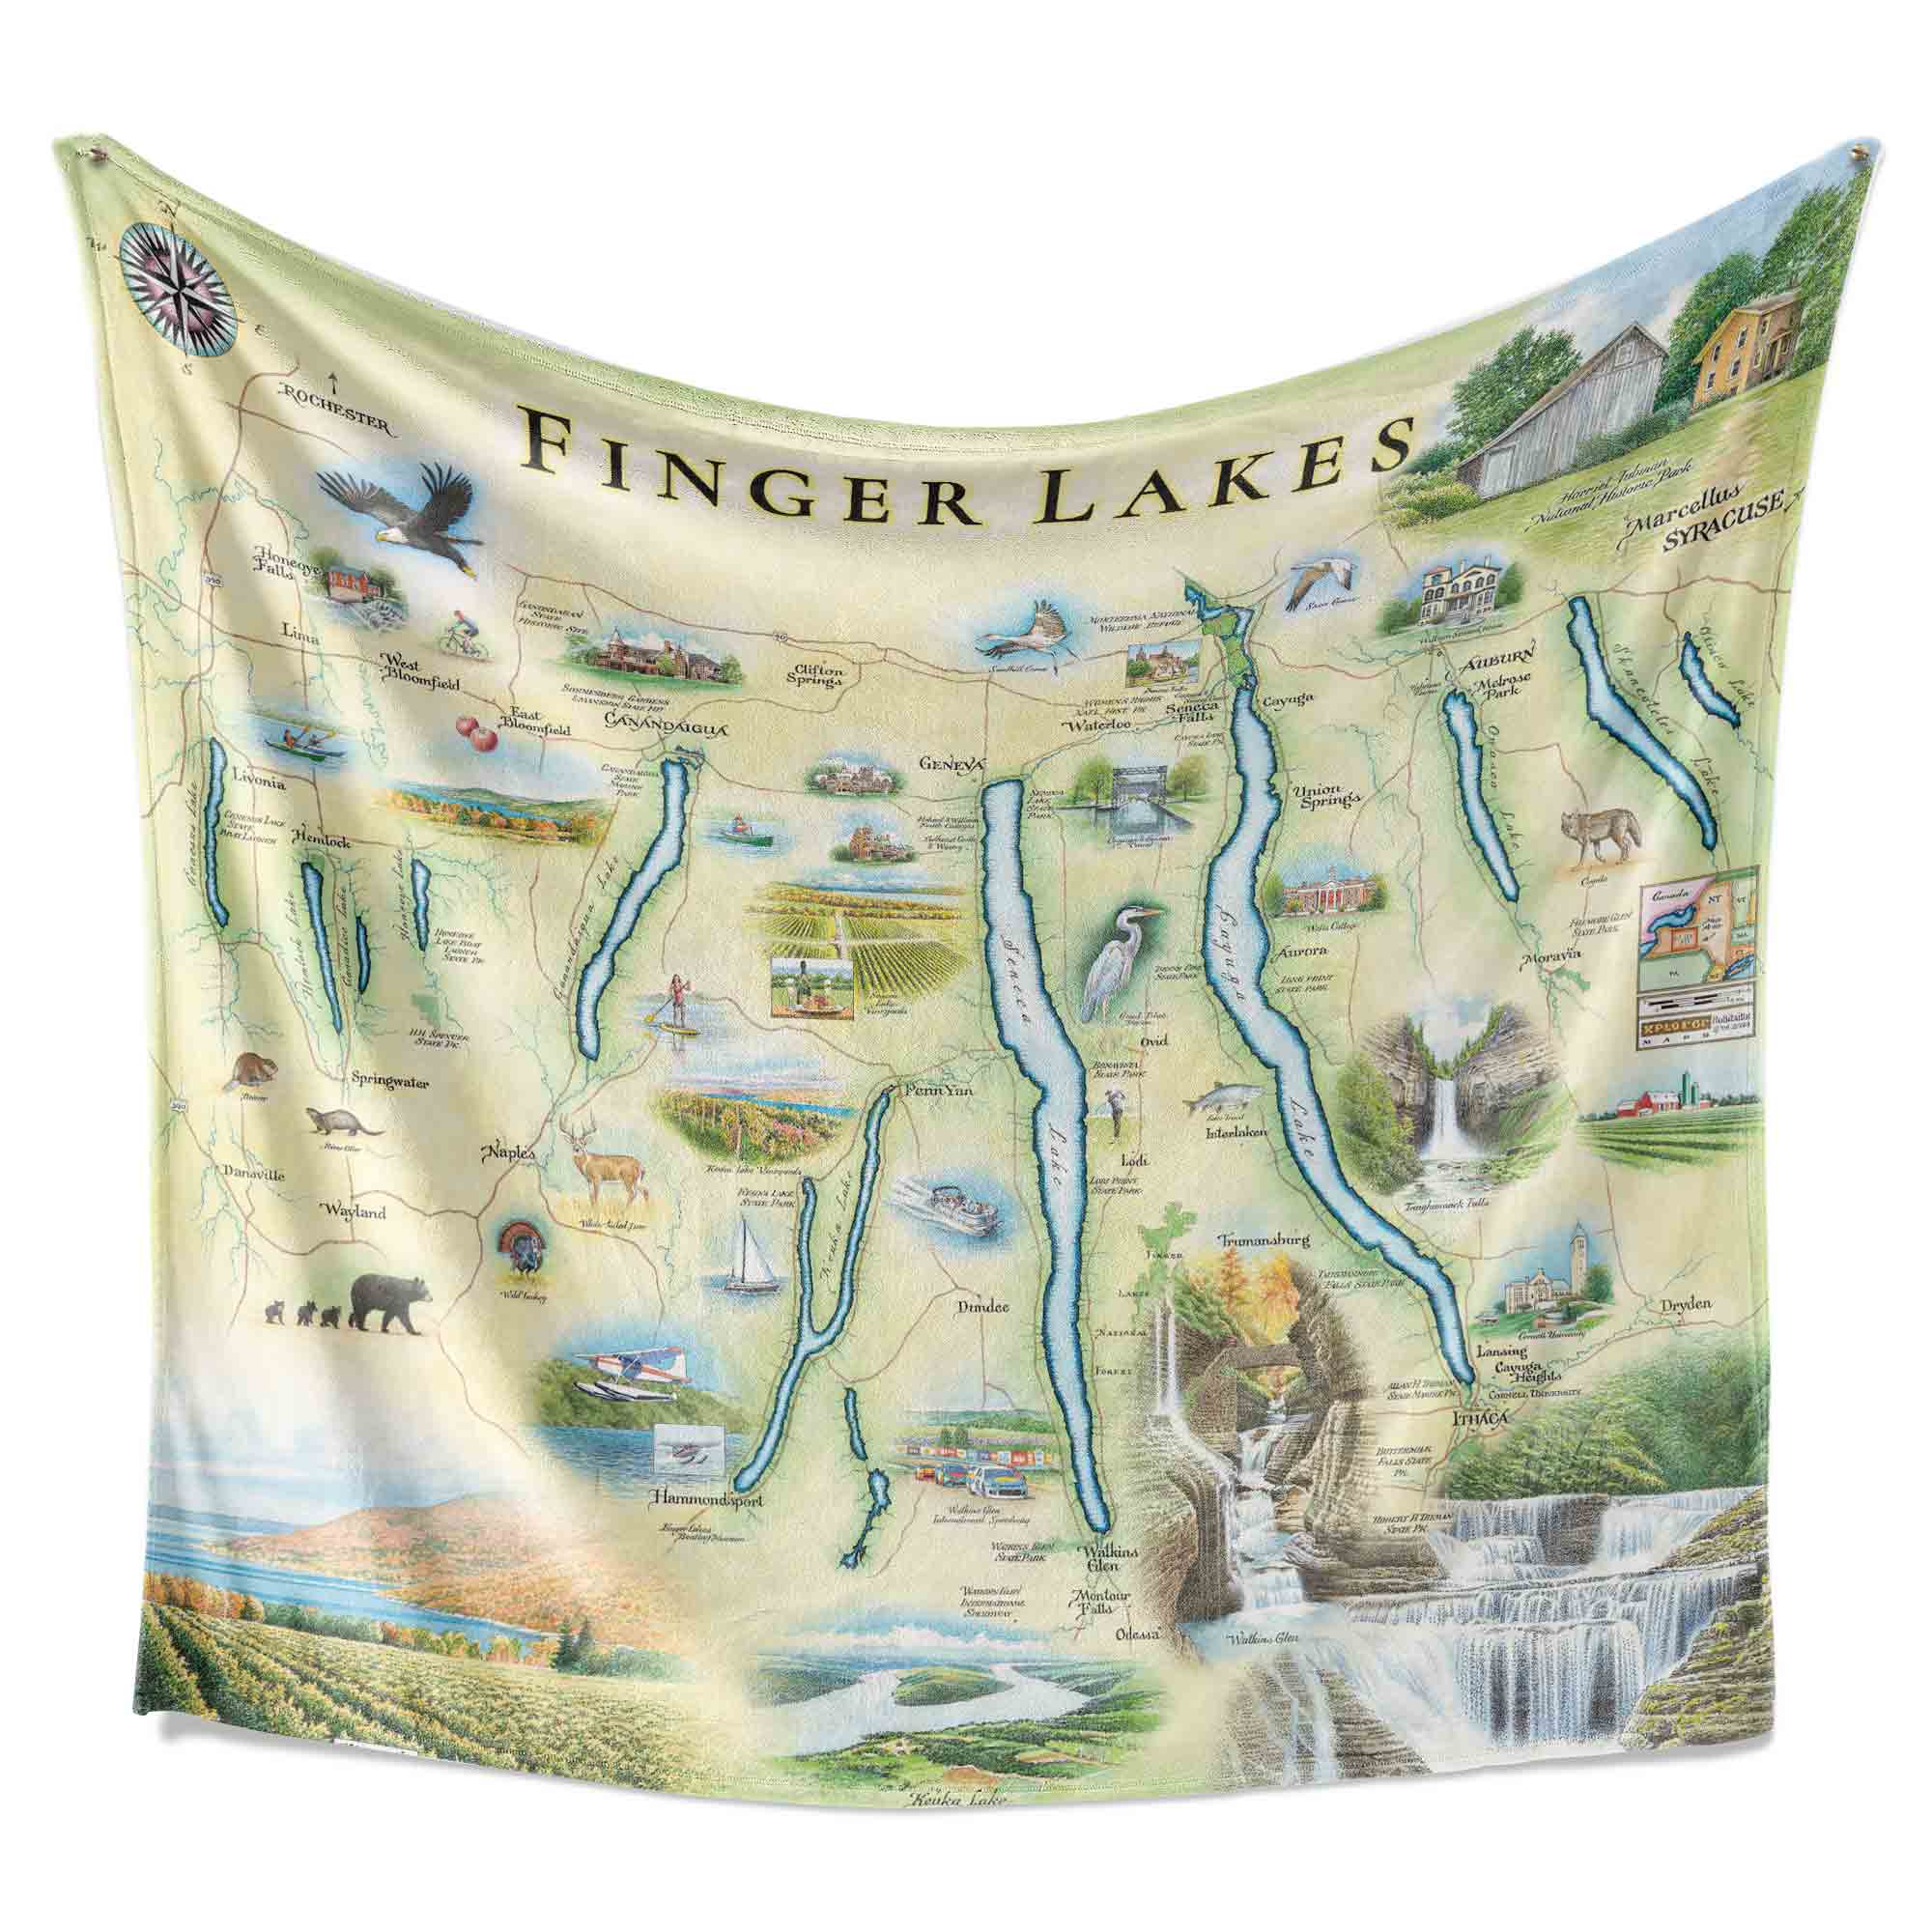  The hanging Finger Lakes Fleece Blanket showcases the stunning beauty of New York State's Finger Lakes region, including Canandaigua, Keuka, Seneca, Cayuga, and Skaneateles Lakes. Seneca is the largest, while Keuka has a distinctive Y-shape. Charming towns like Skaneateles and wine trails around Seneca and Cayuga Lakes add to the region's allure.